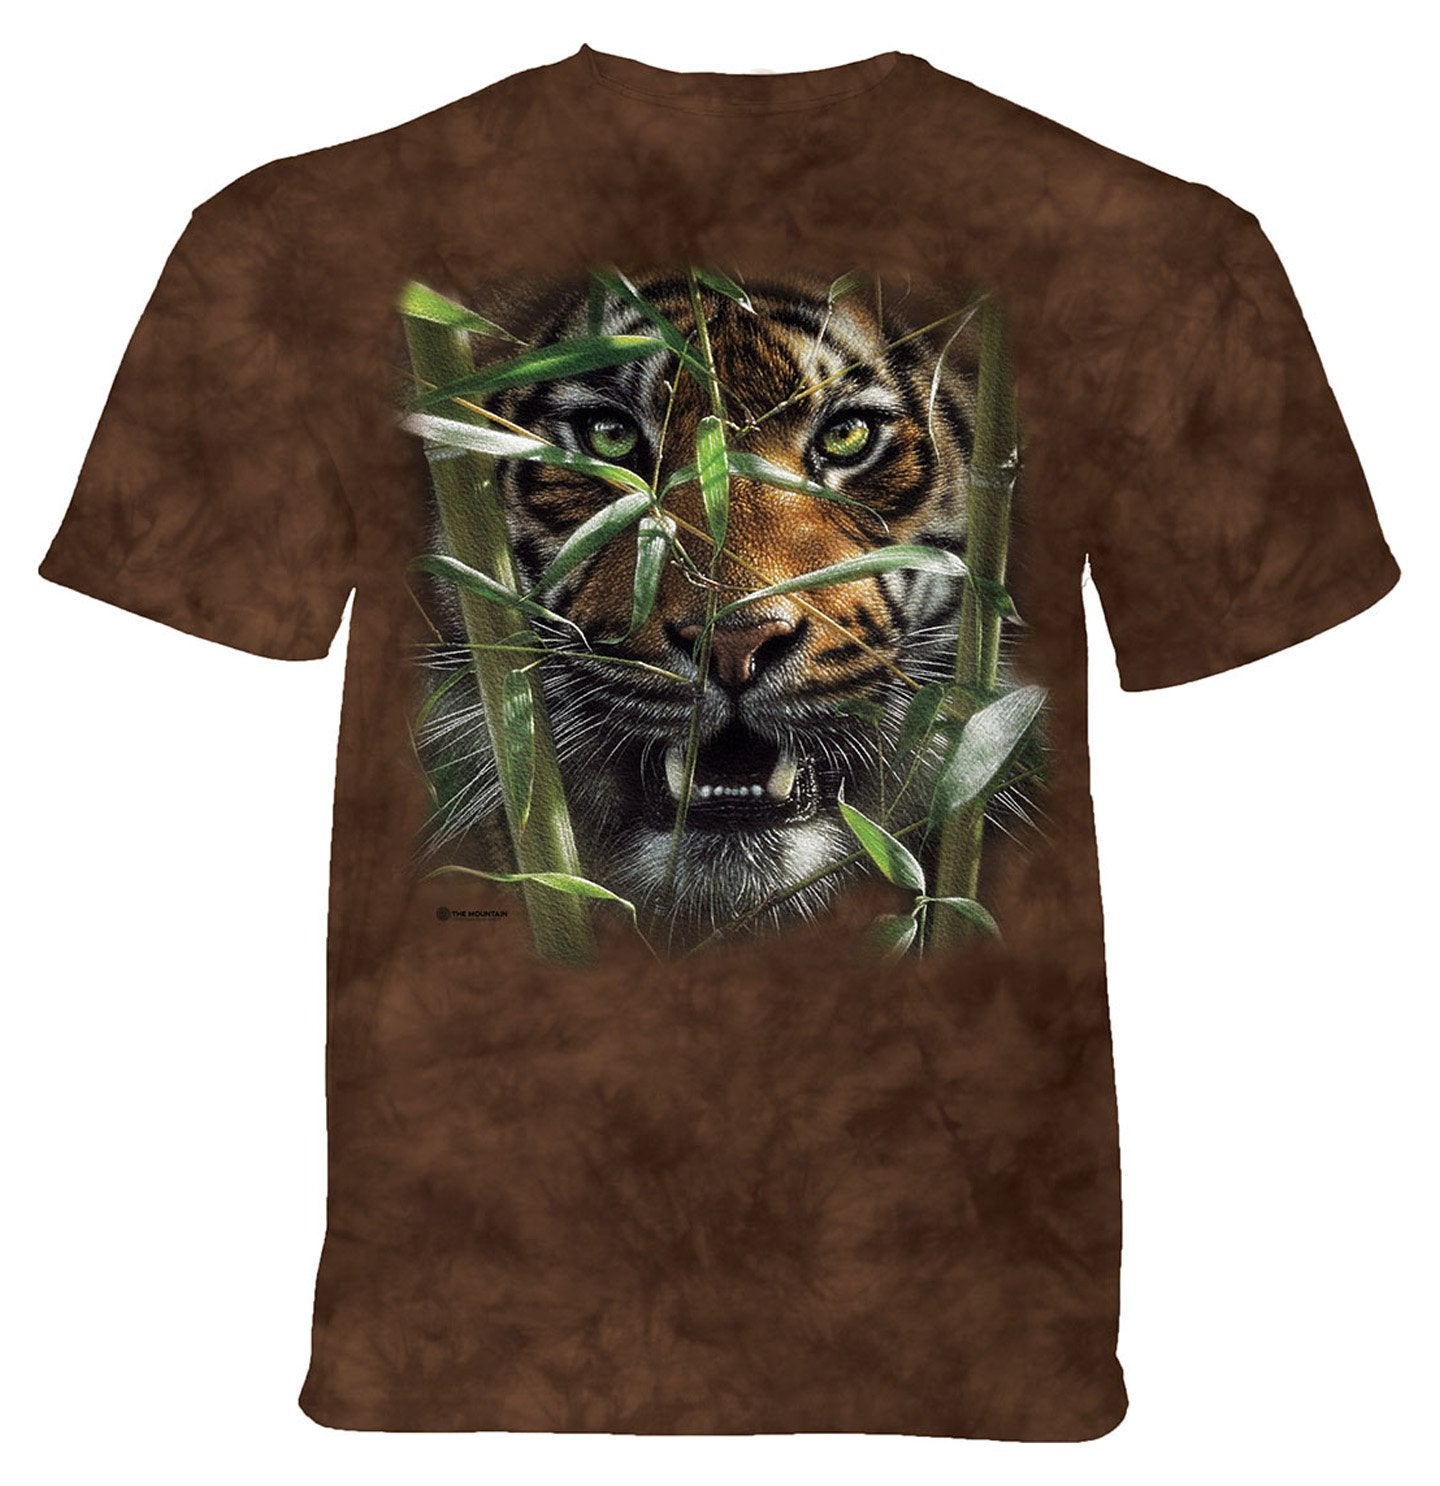 The Mountain - Hungry Tiger Eyes - Adult Unisex T-Shirt